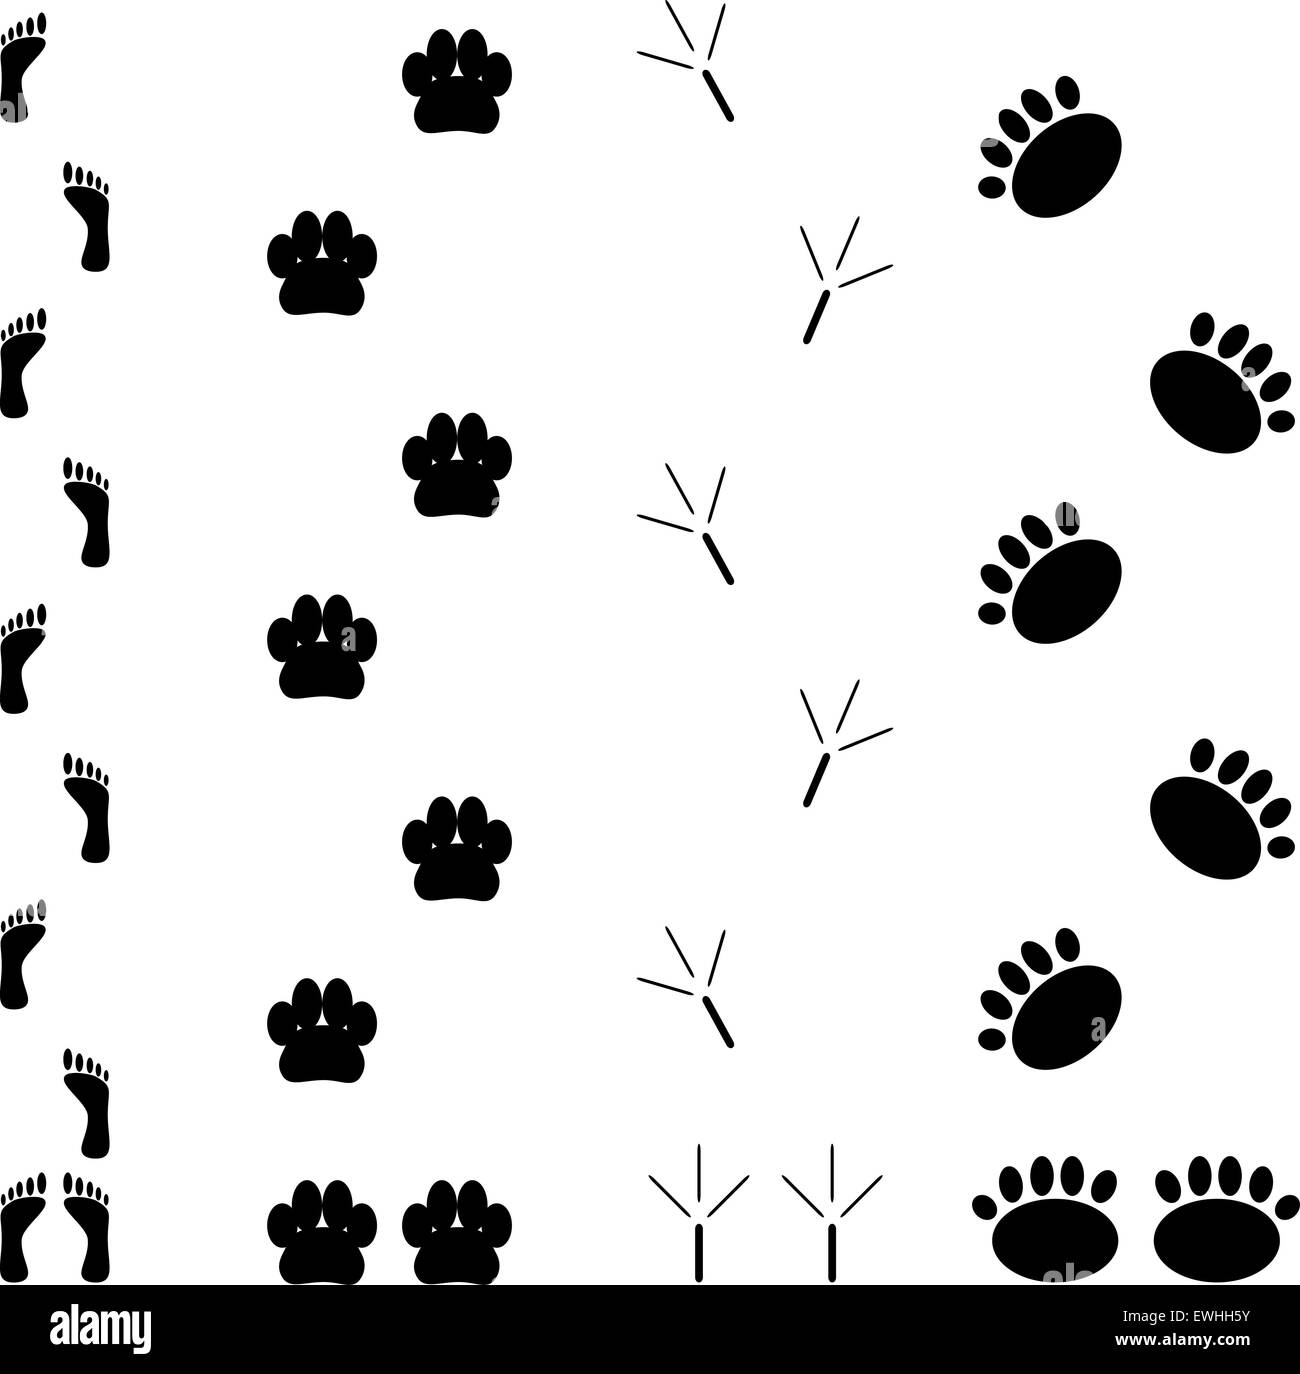 Foot print set. Step silhouette animal, track and trace, vector graphic illustration Stock Photo